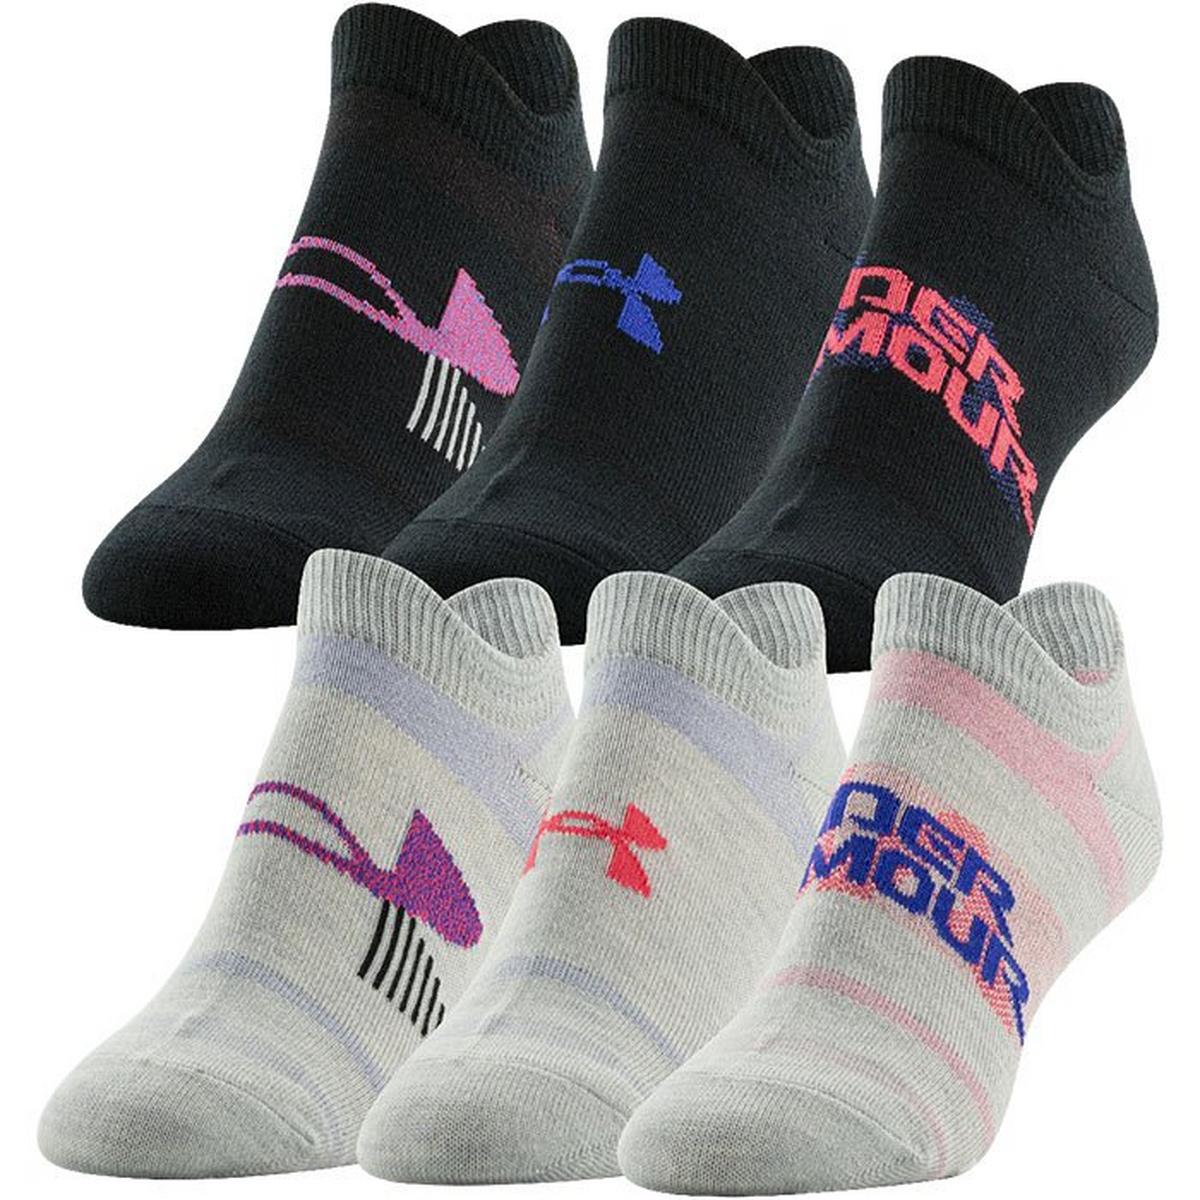 Women's Essential No-Show Sock (6 Pack)